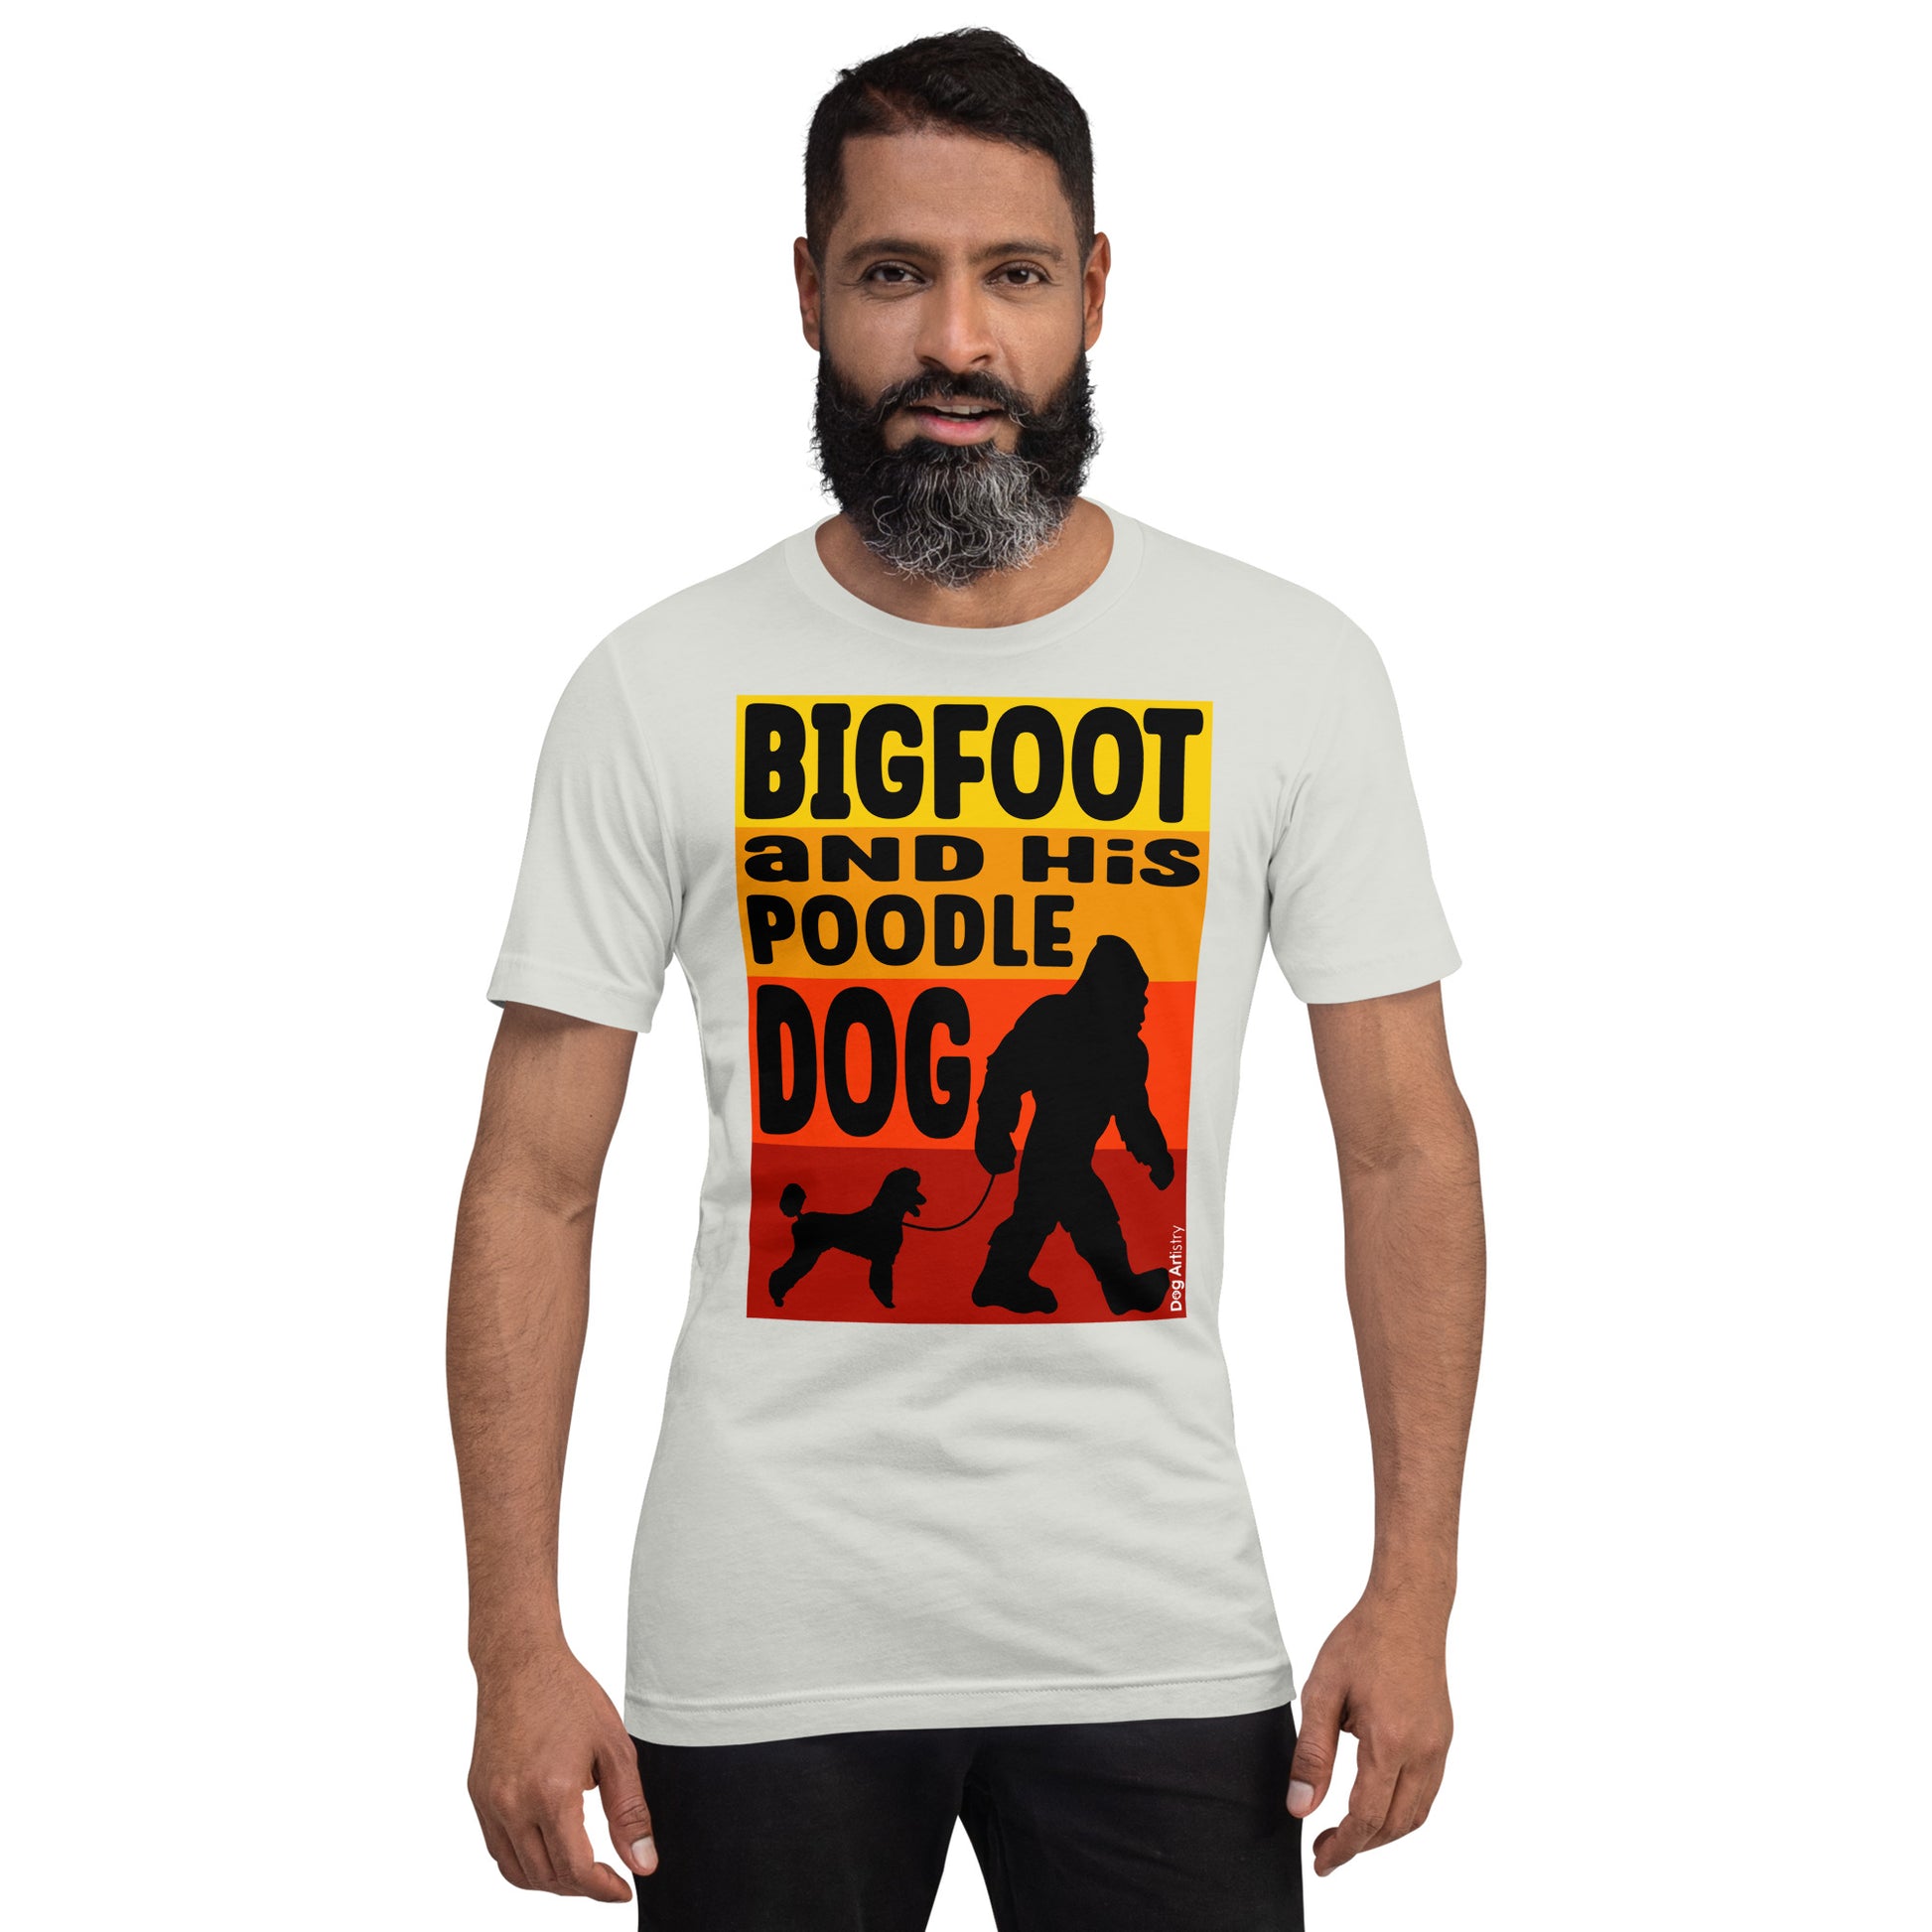 Bigfoot and his Poodle unisex silver t-shirt by Dog Artistry.